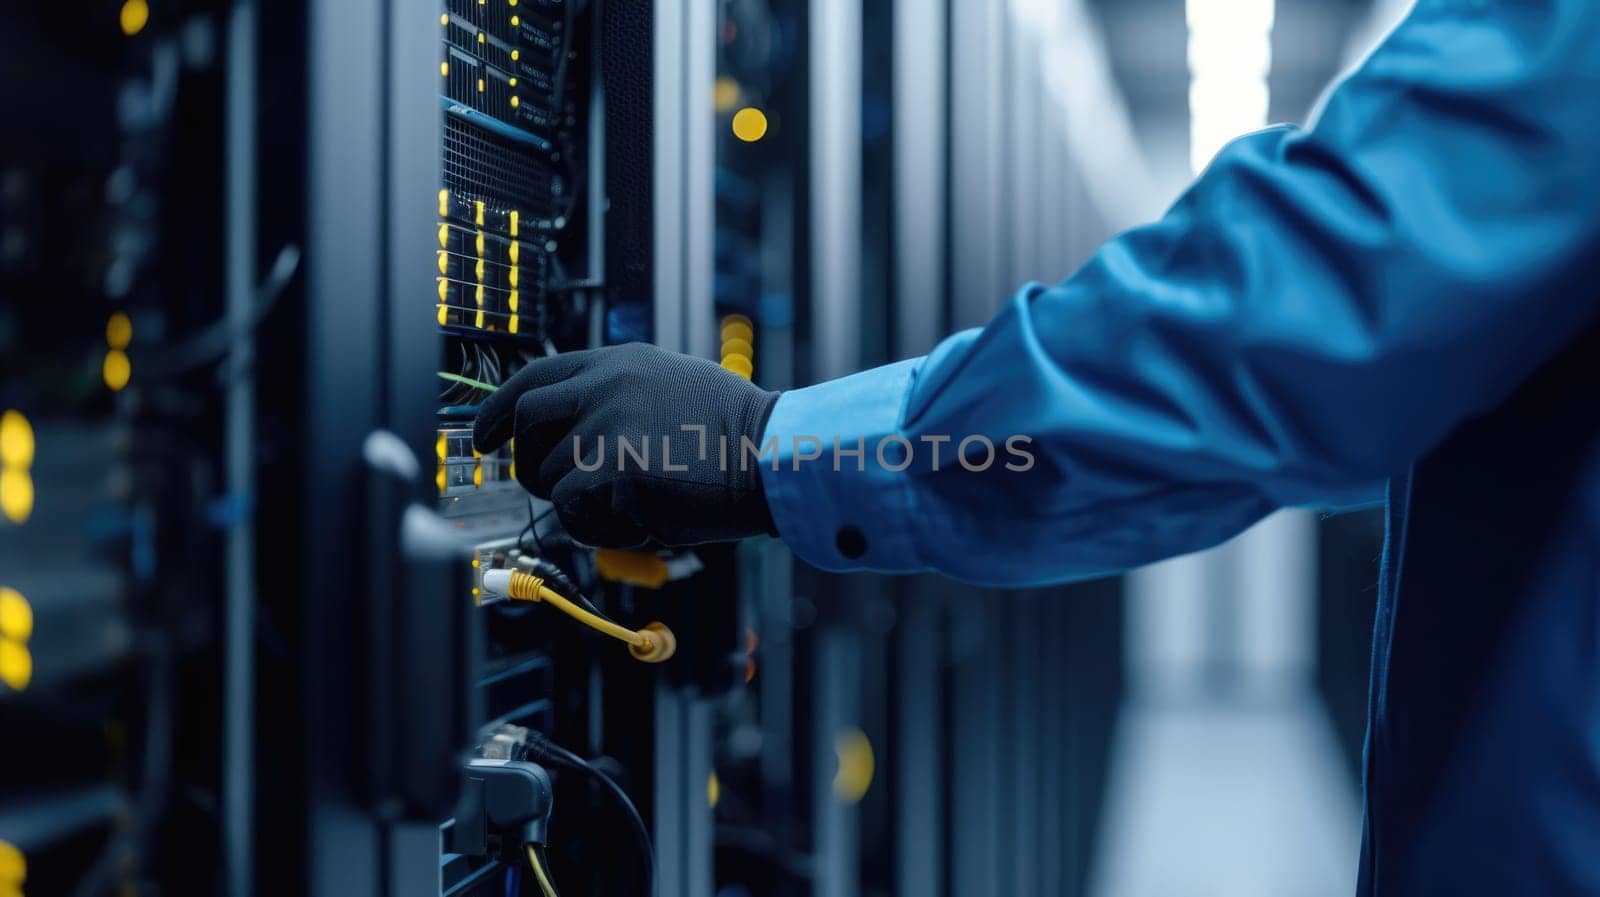 A man operates an electric blue server in a glass data center. AIG41 by biancoblue